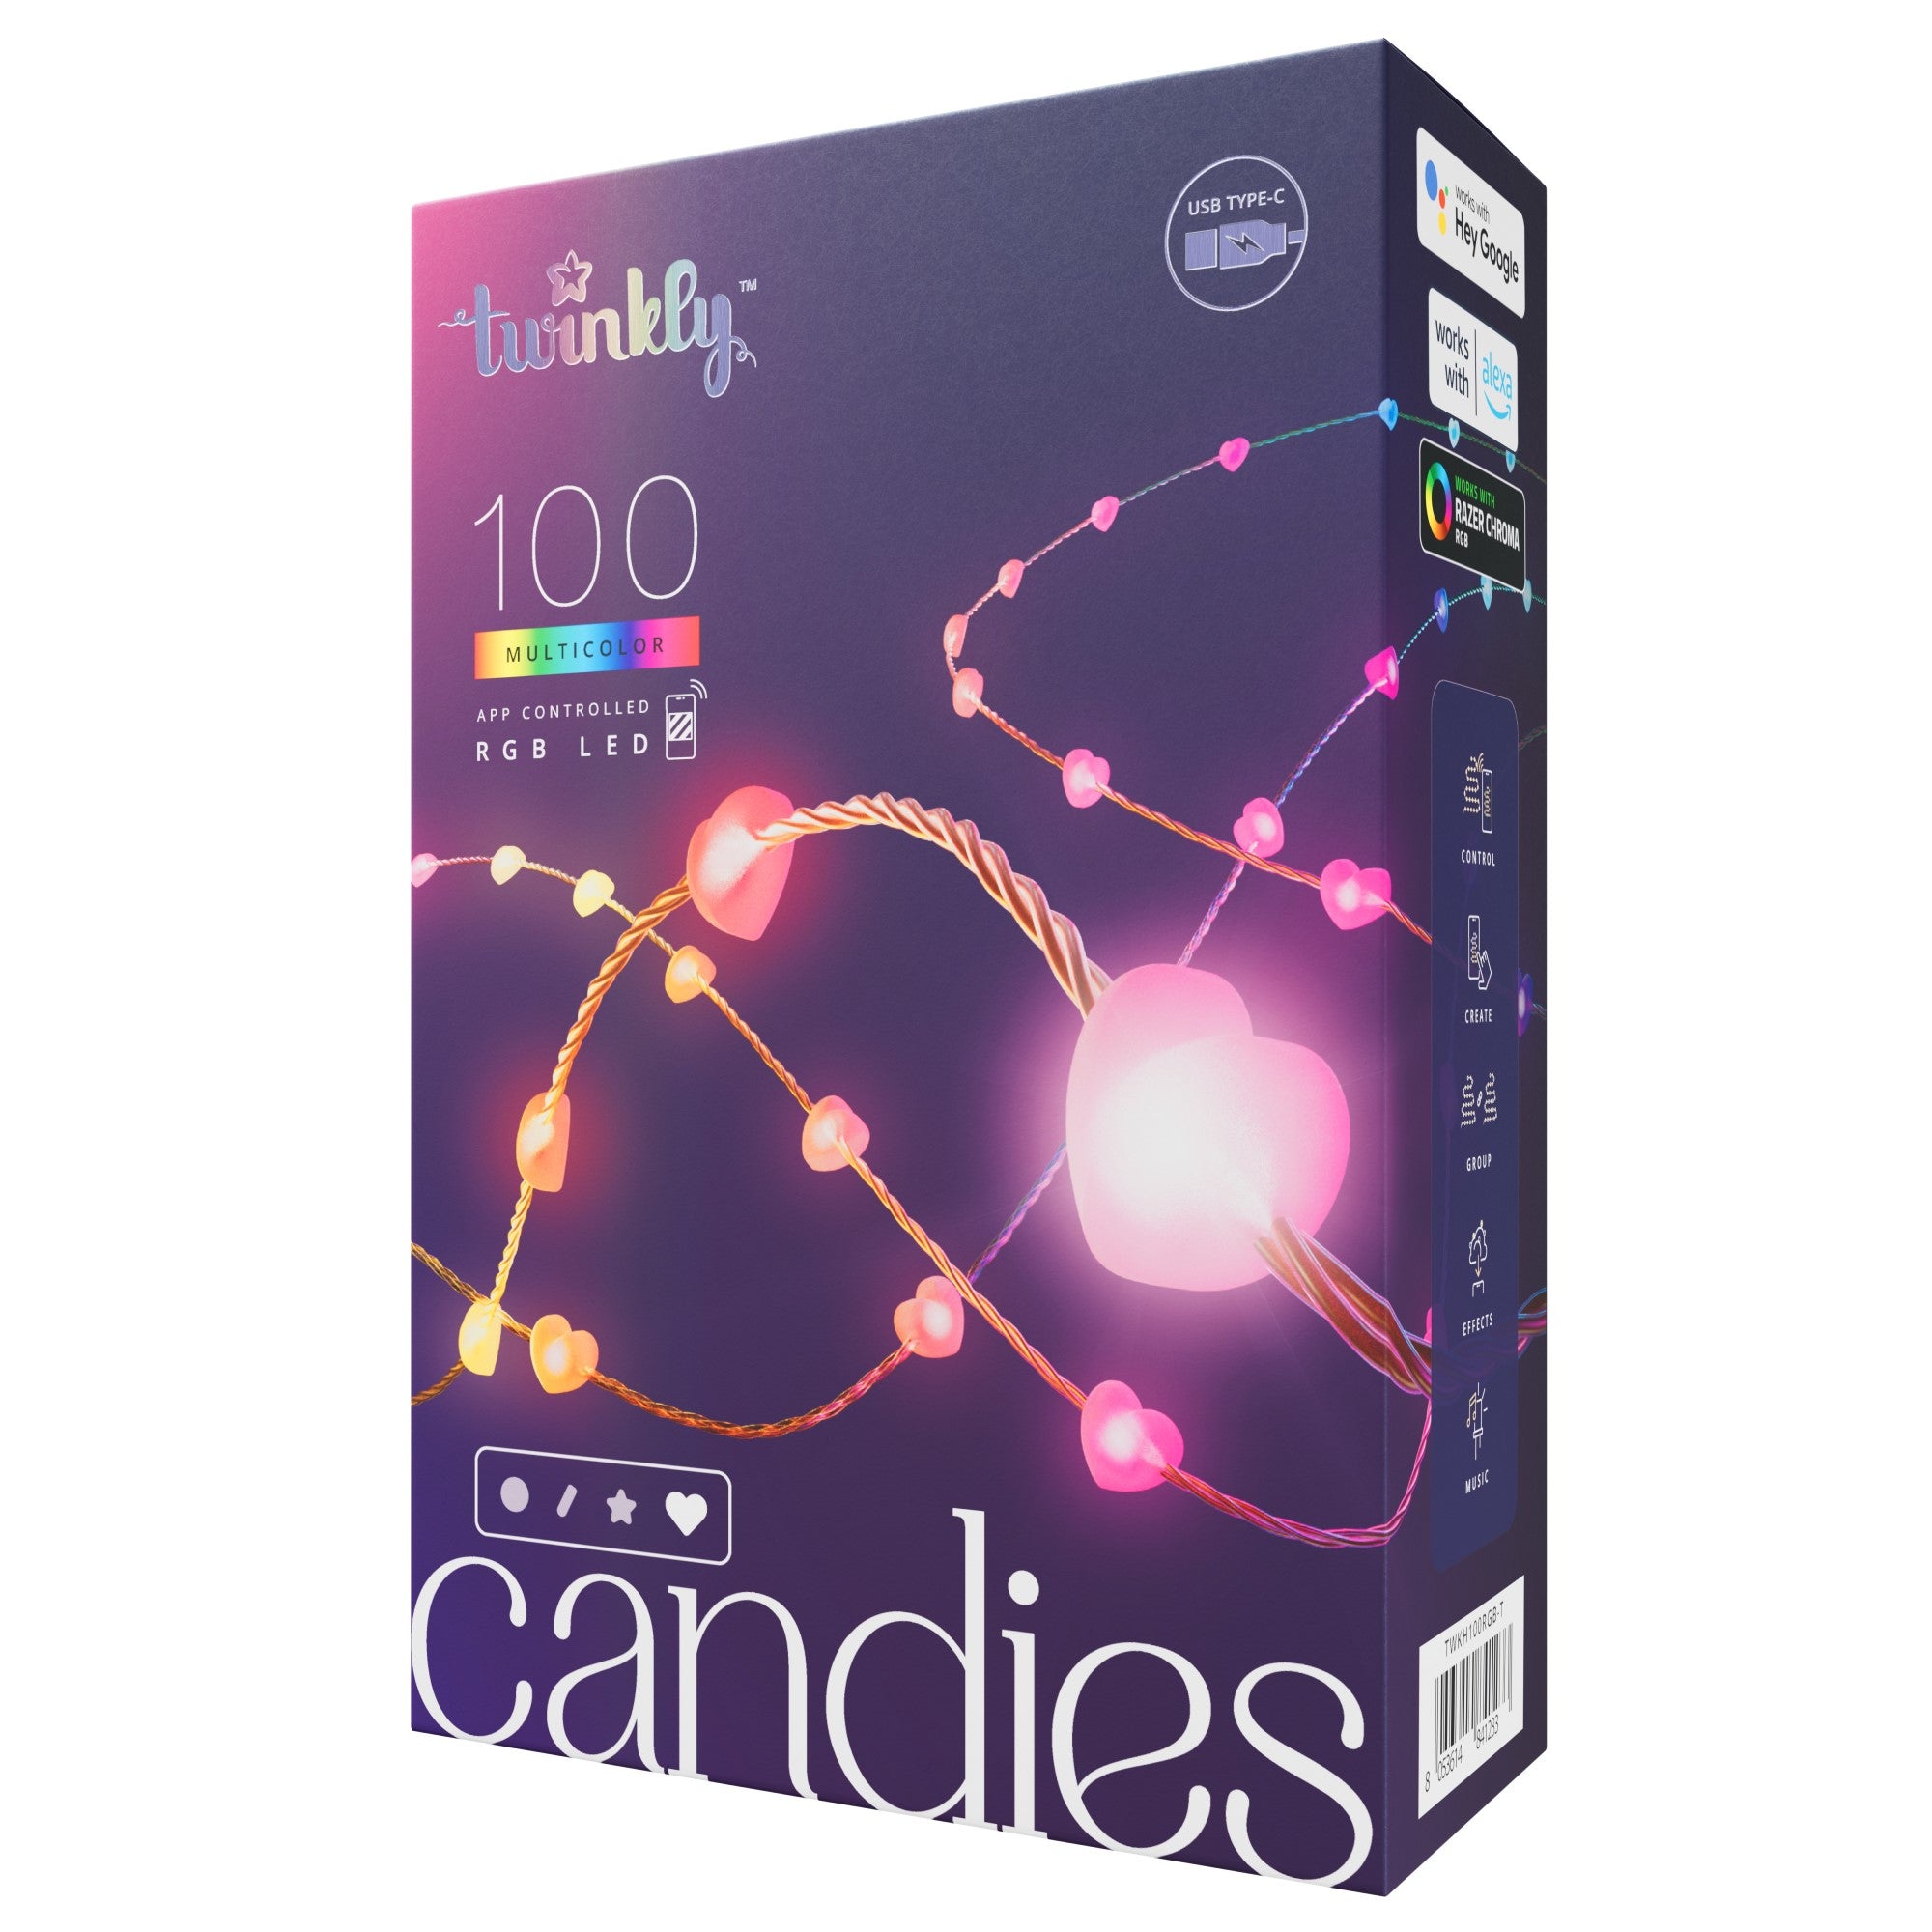 Twinkly Candies LED light chain RGB app controlled candle shape 200 LEDs